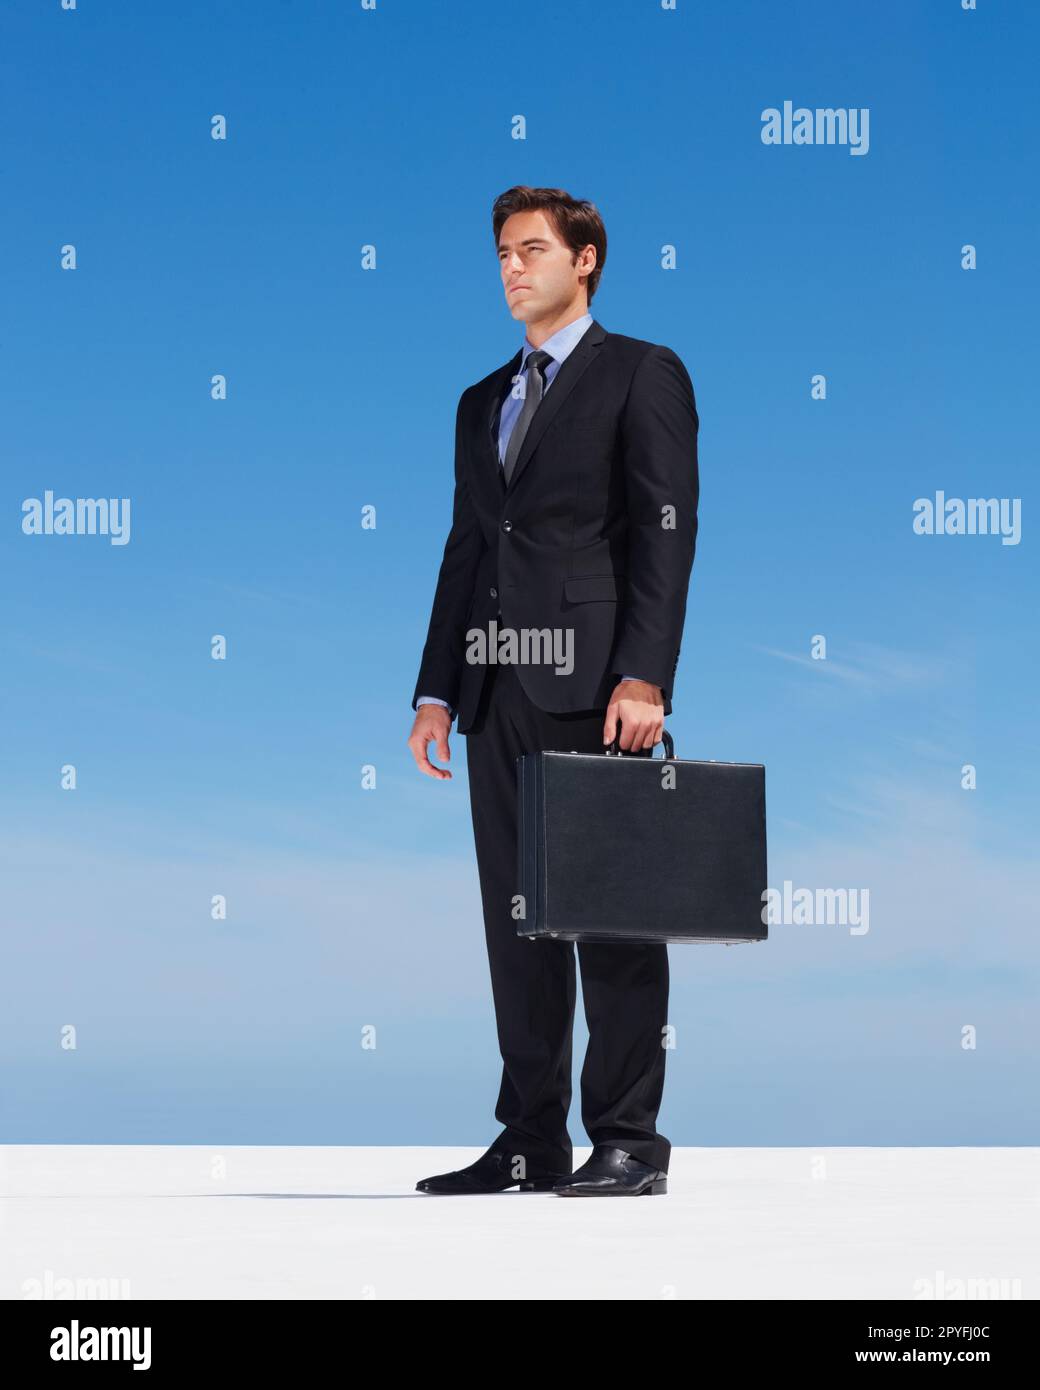 Successful business man standing by the sea. Portrait of a successful business man standing by the sea. Stock Photo